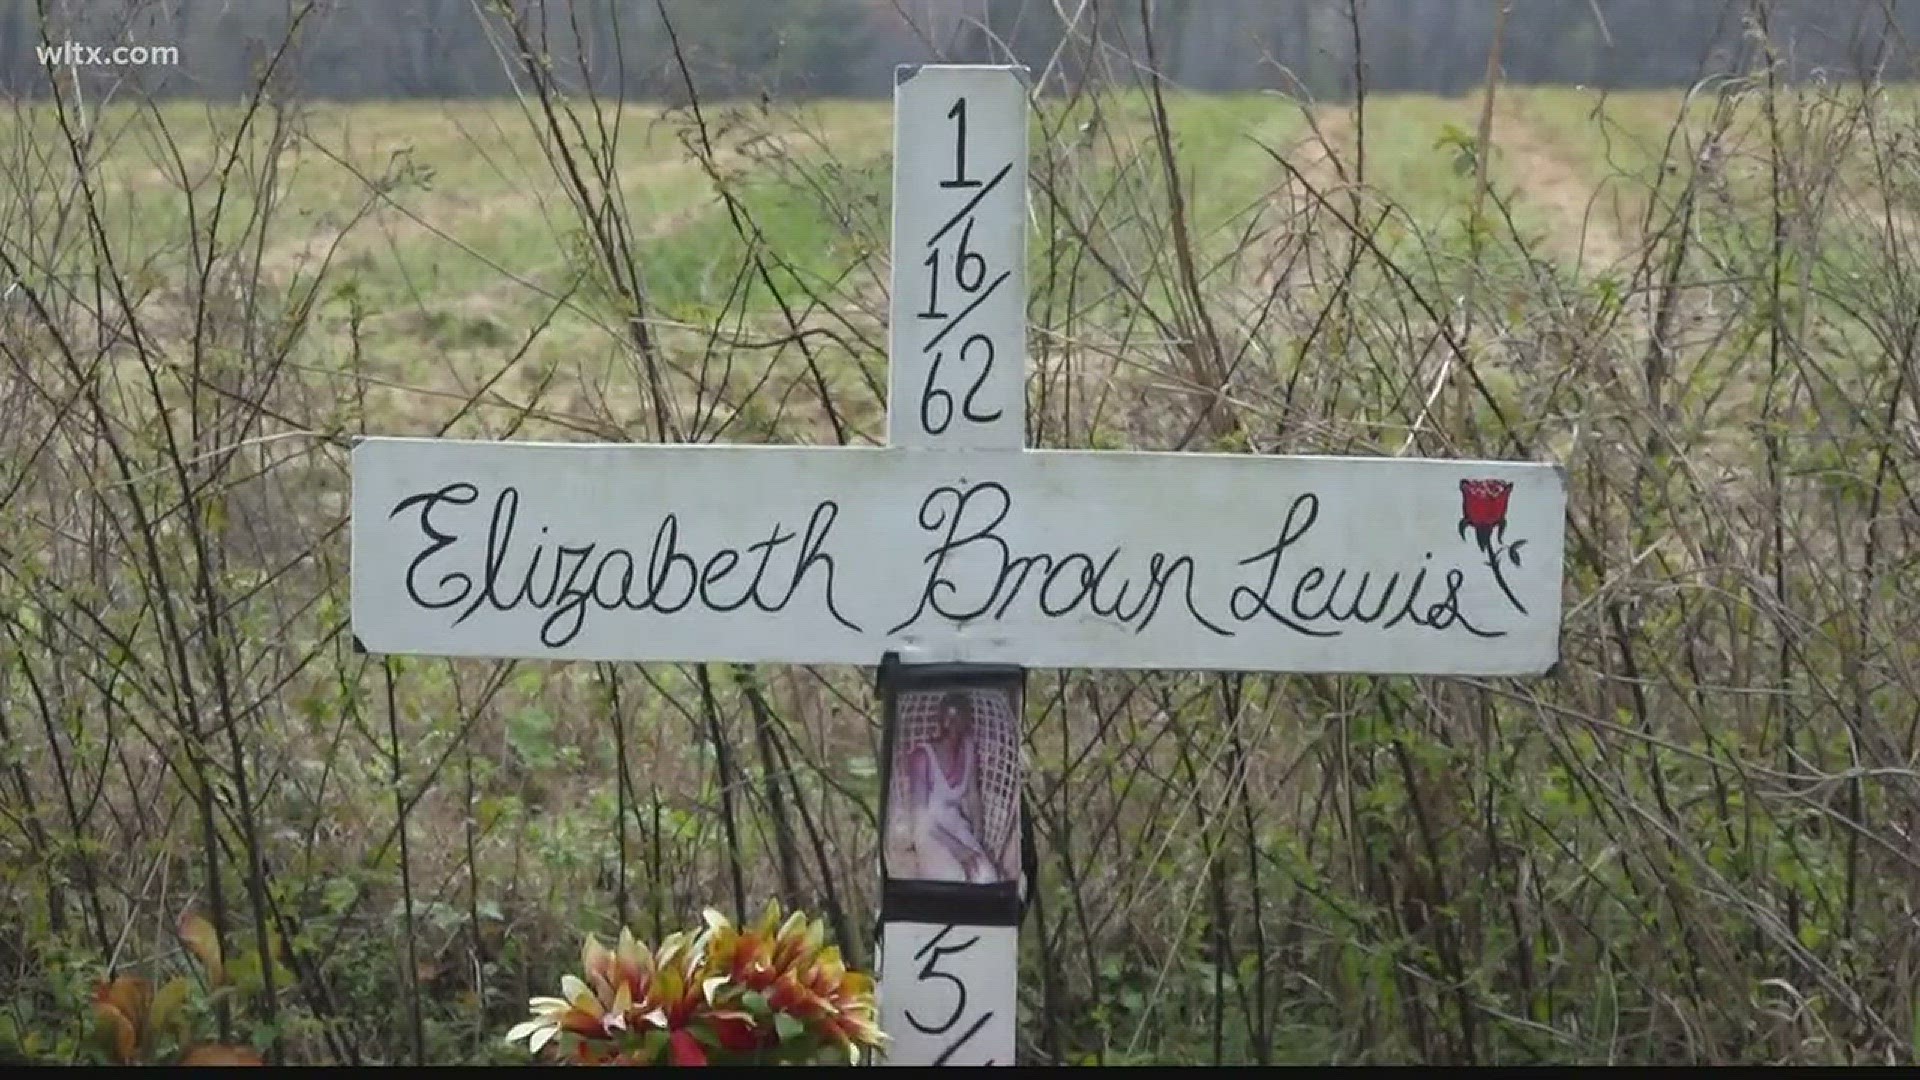 Three families are dealing with the pain of losing loved ones to hit-and-run accidents in Sumter County.